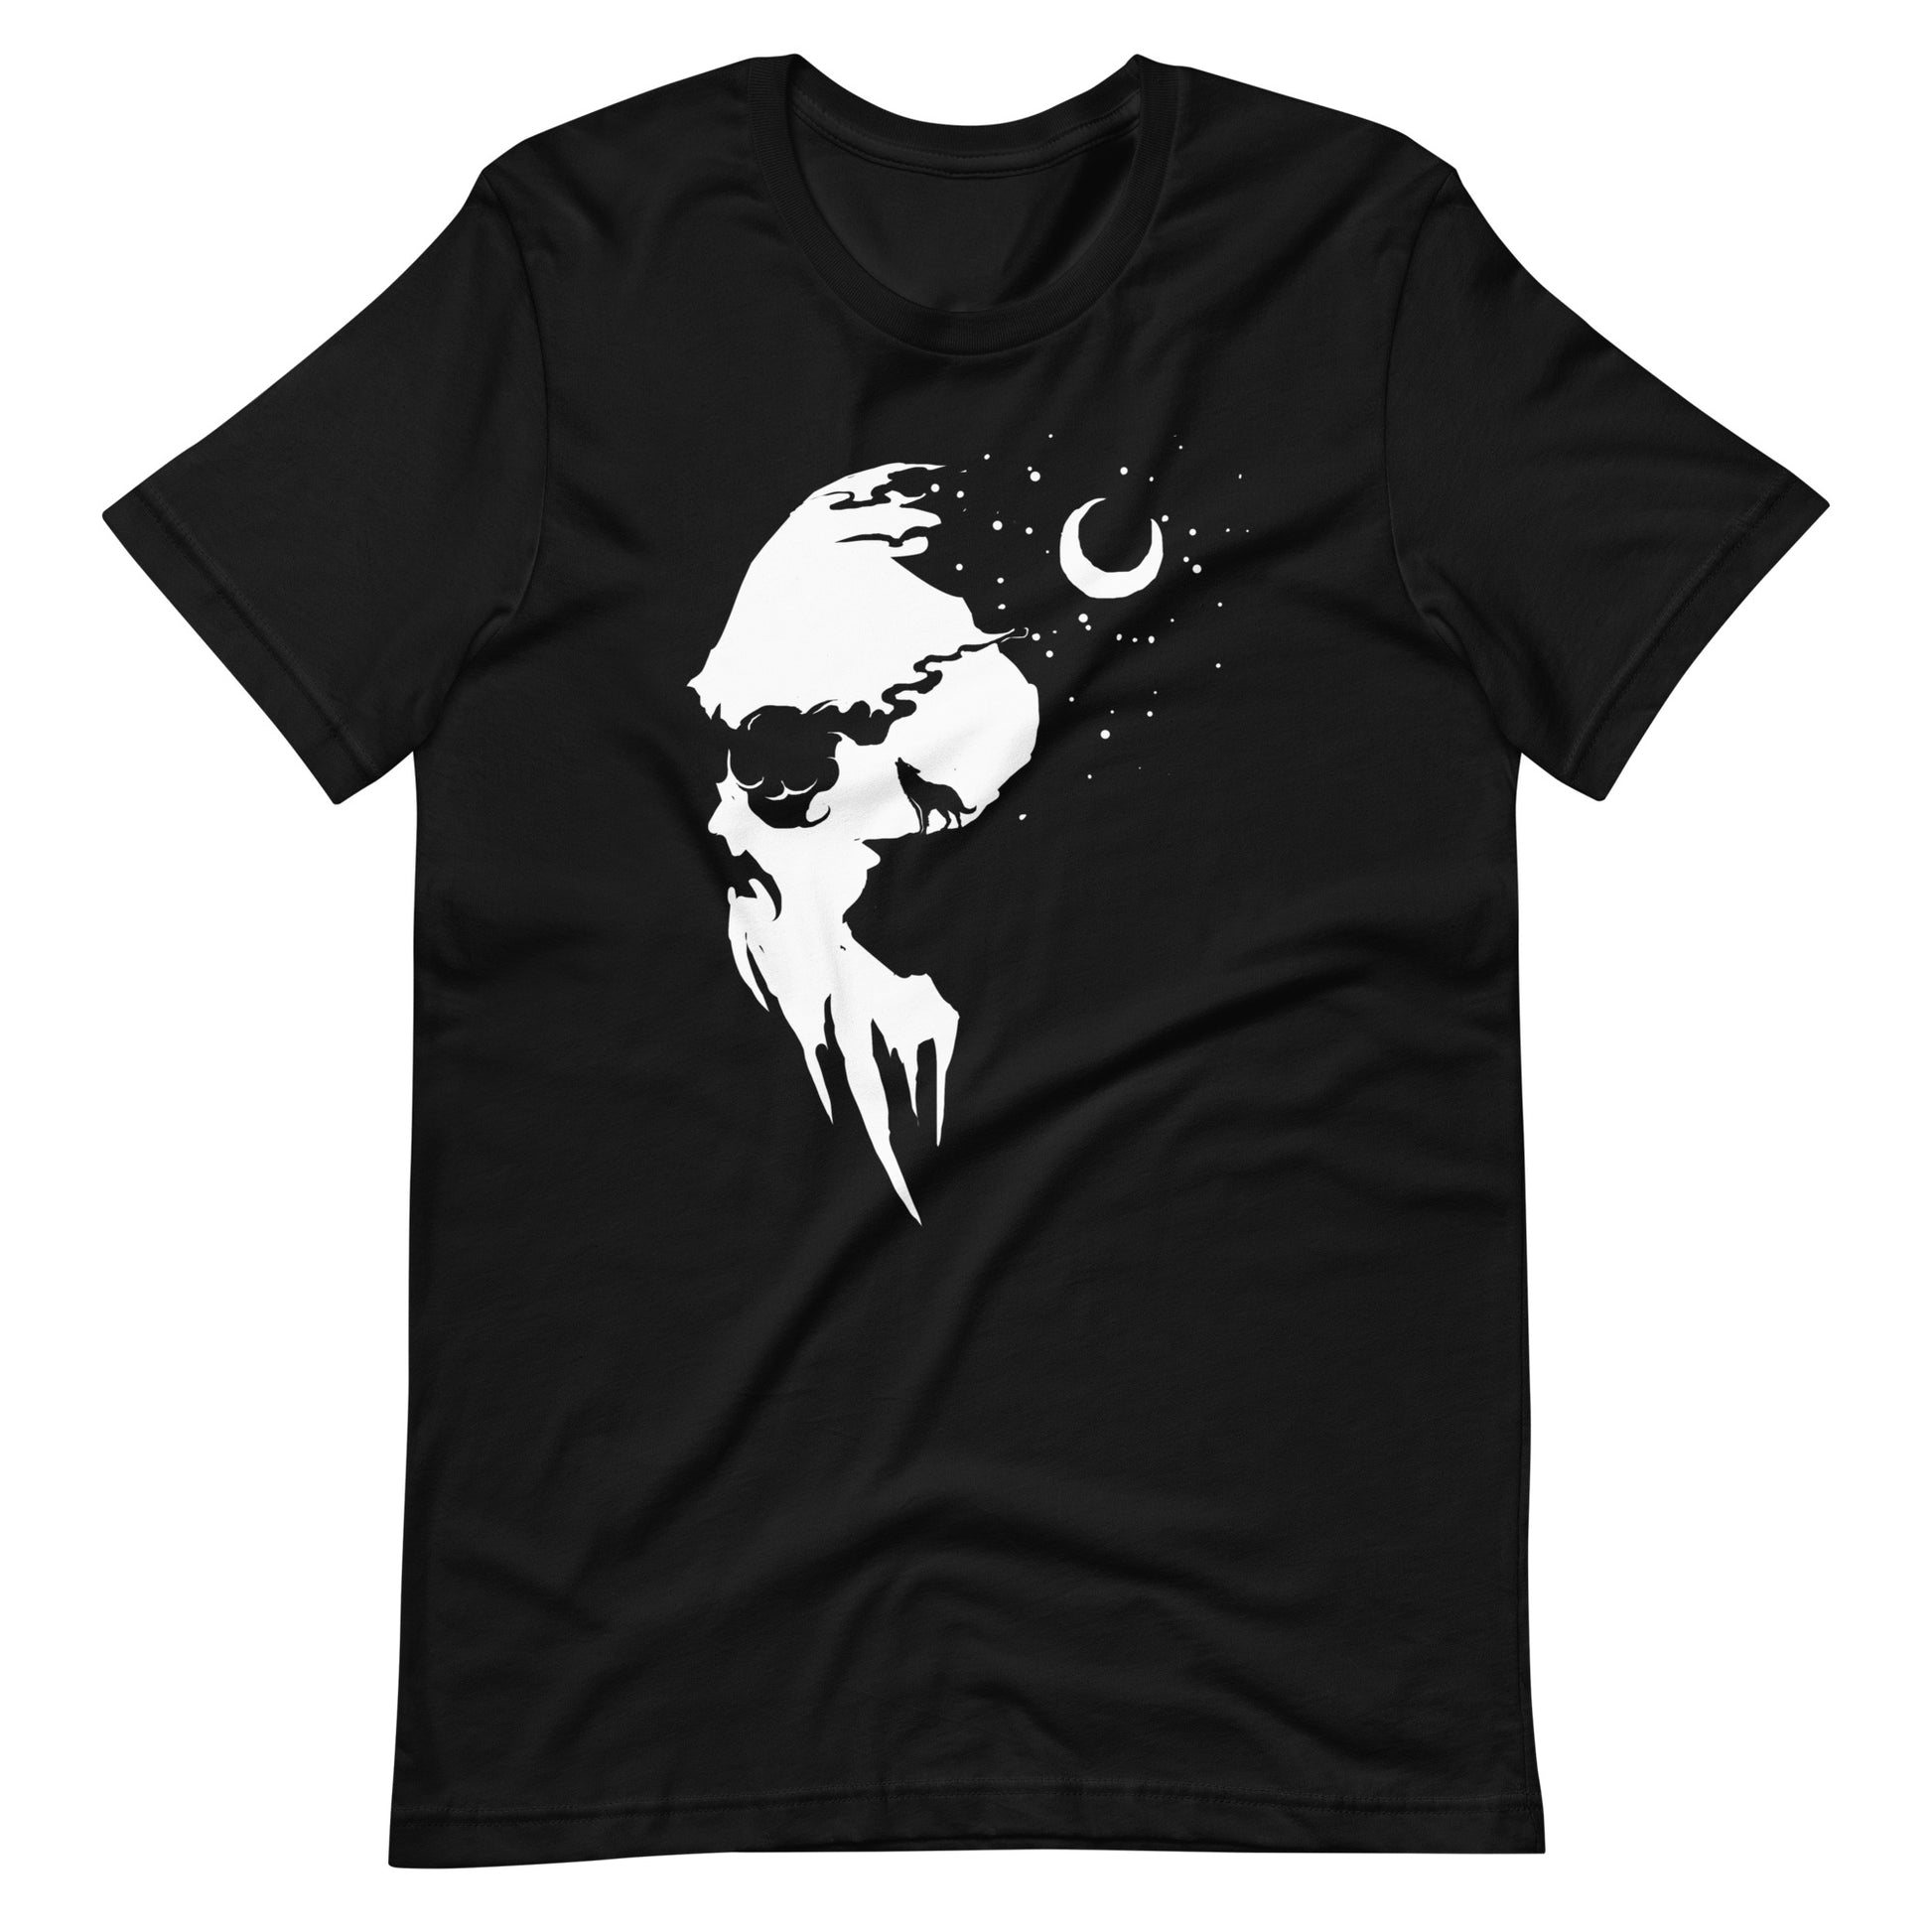 The Night Has Come - Men's t-shirt - Black Front